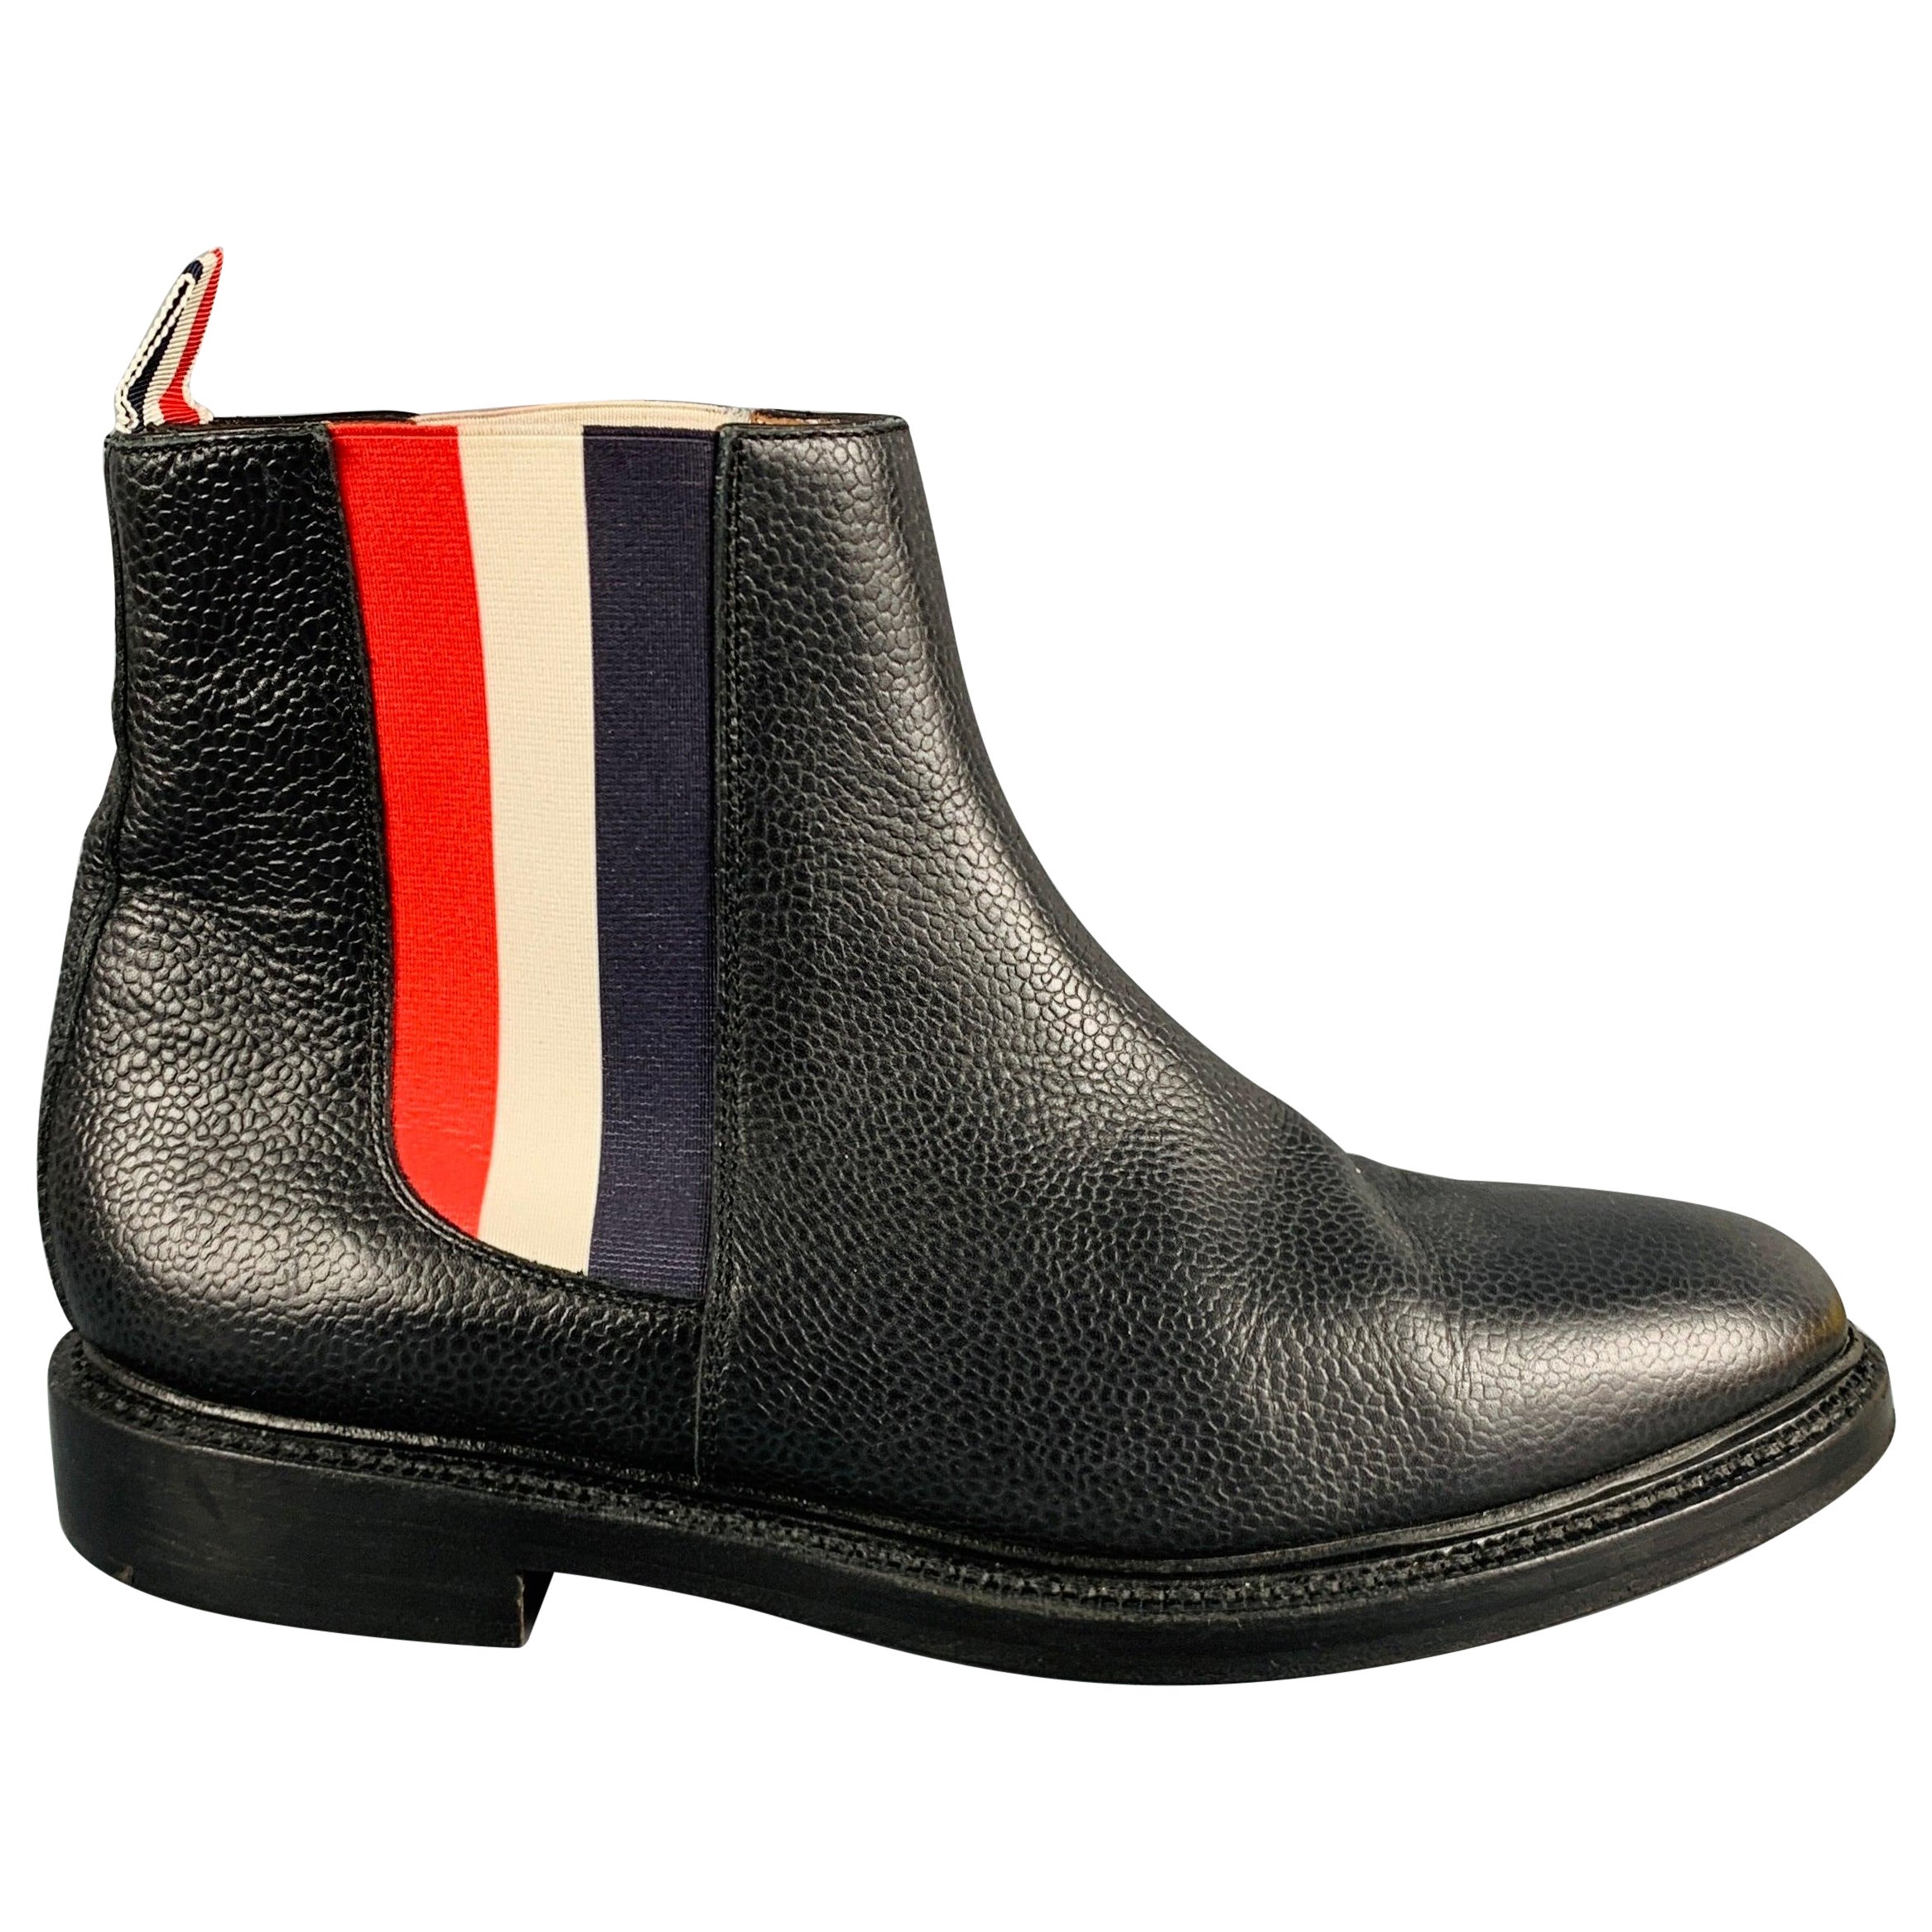 THOM BROWNE Size 9 Black Red White Chelsea Boots For Sale